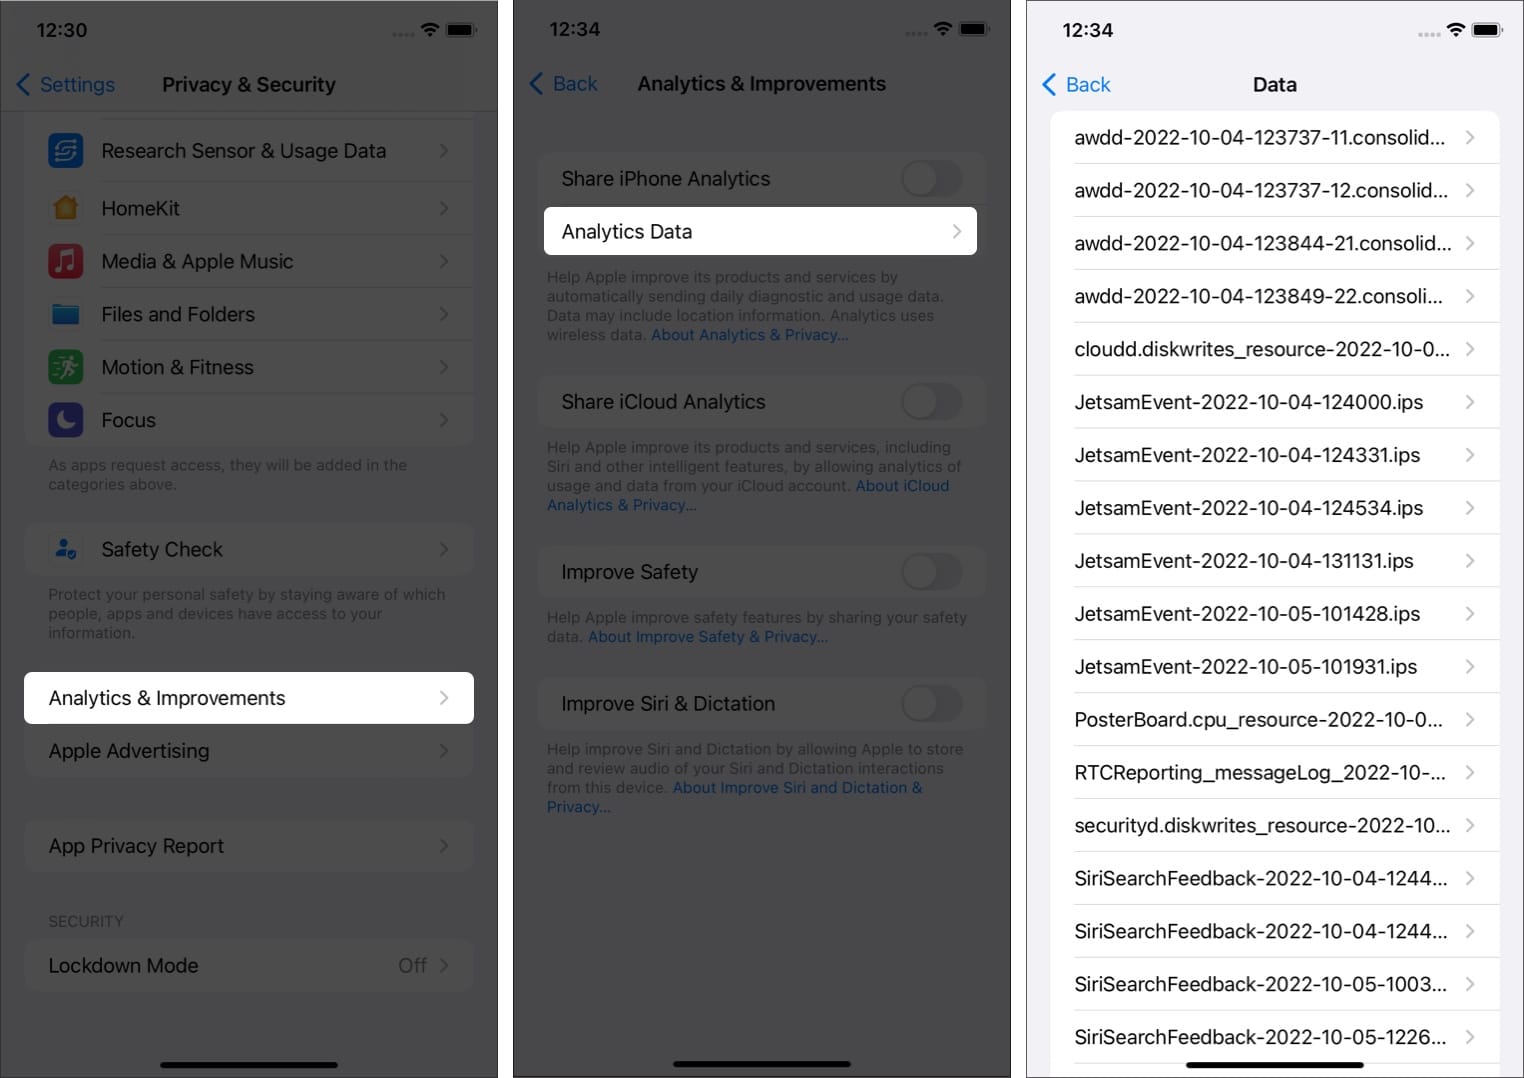 Steps to check for error logs on an iPhone